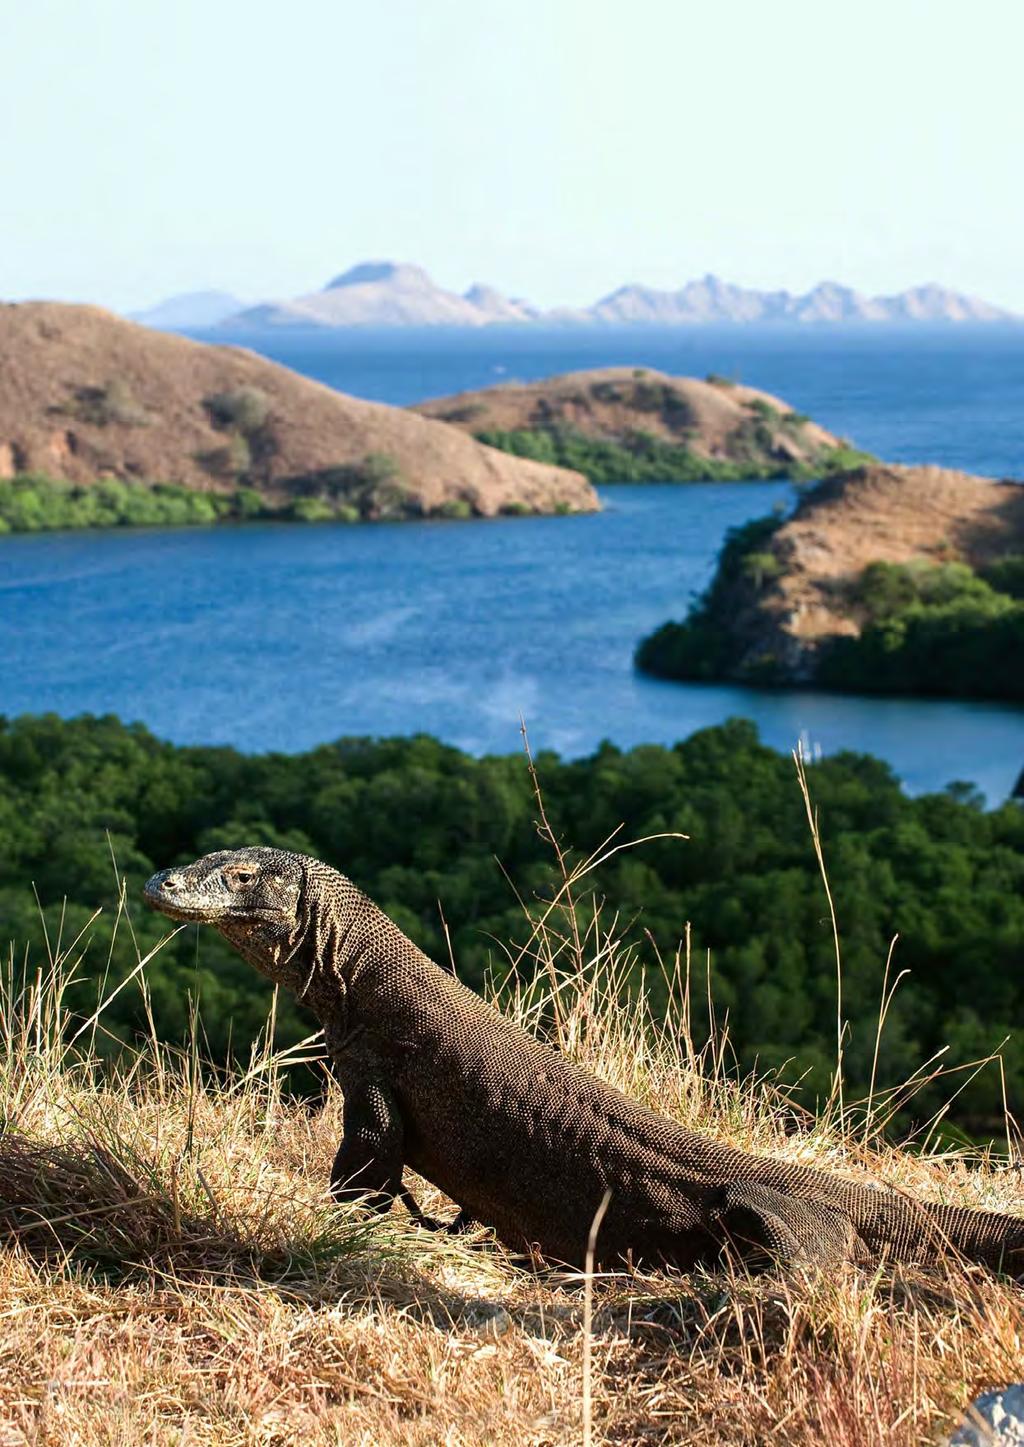 Komodo Dragon DAY 4 RINCA After breakfast, a short trip in the tender takes us to see the majestic dragons